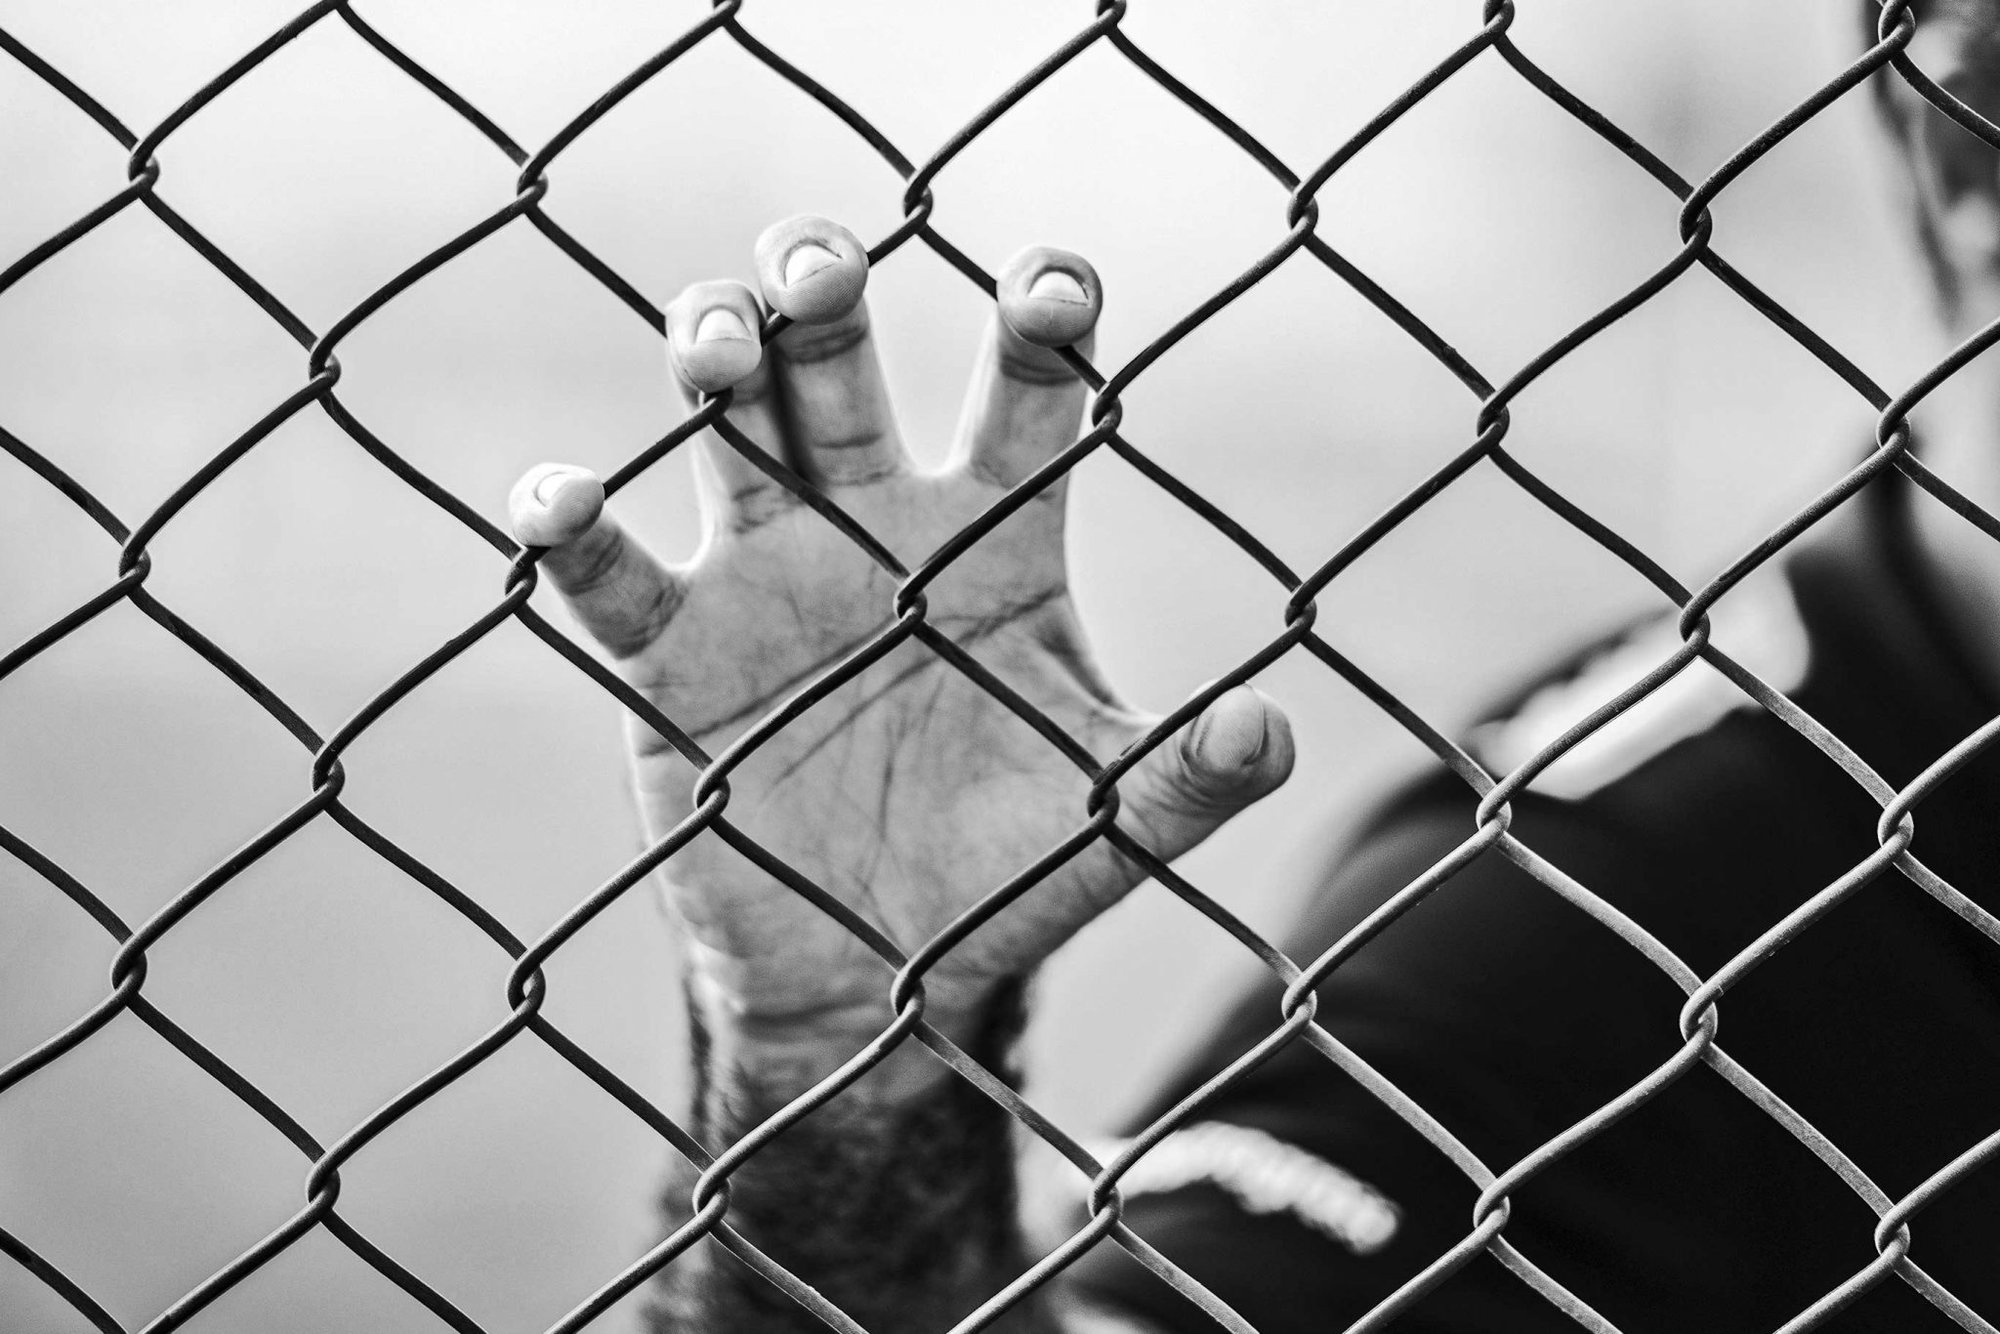 A corrupt correctional officer convicted of taking bribes to smuggle narcotics and contraband tobacco to Maryland prisoners faces up to 20 years in a federal penitentiary. Photo by Fakurian Design on Unsplash.